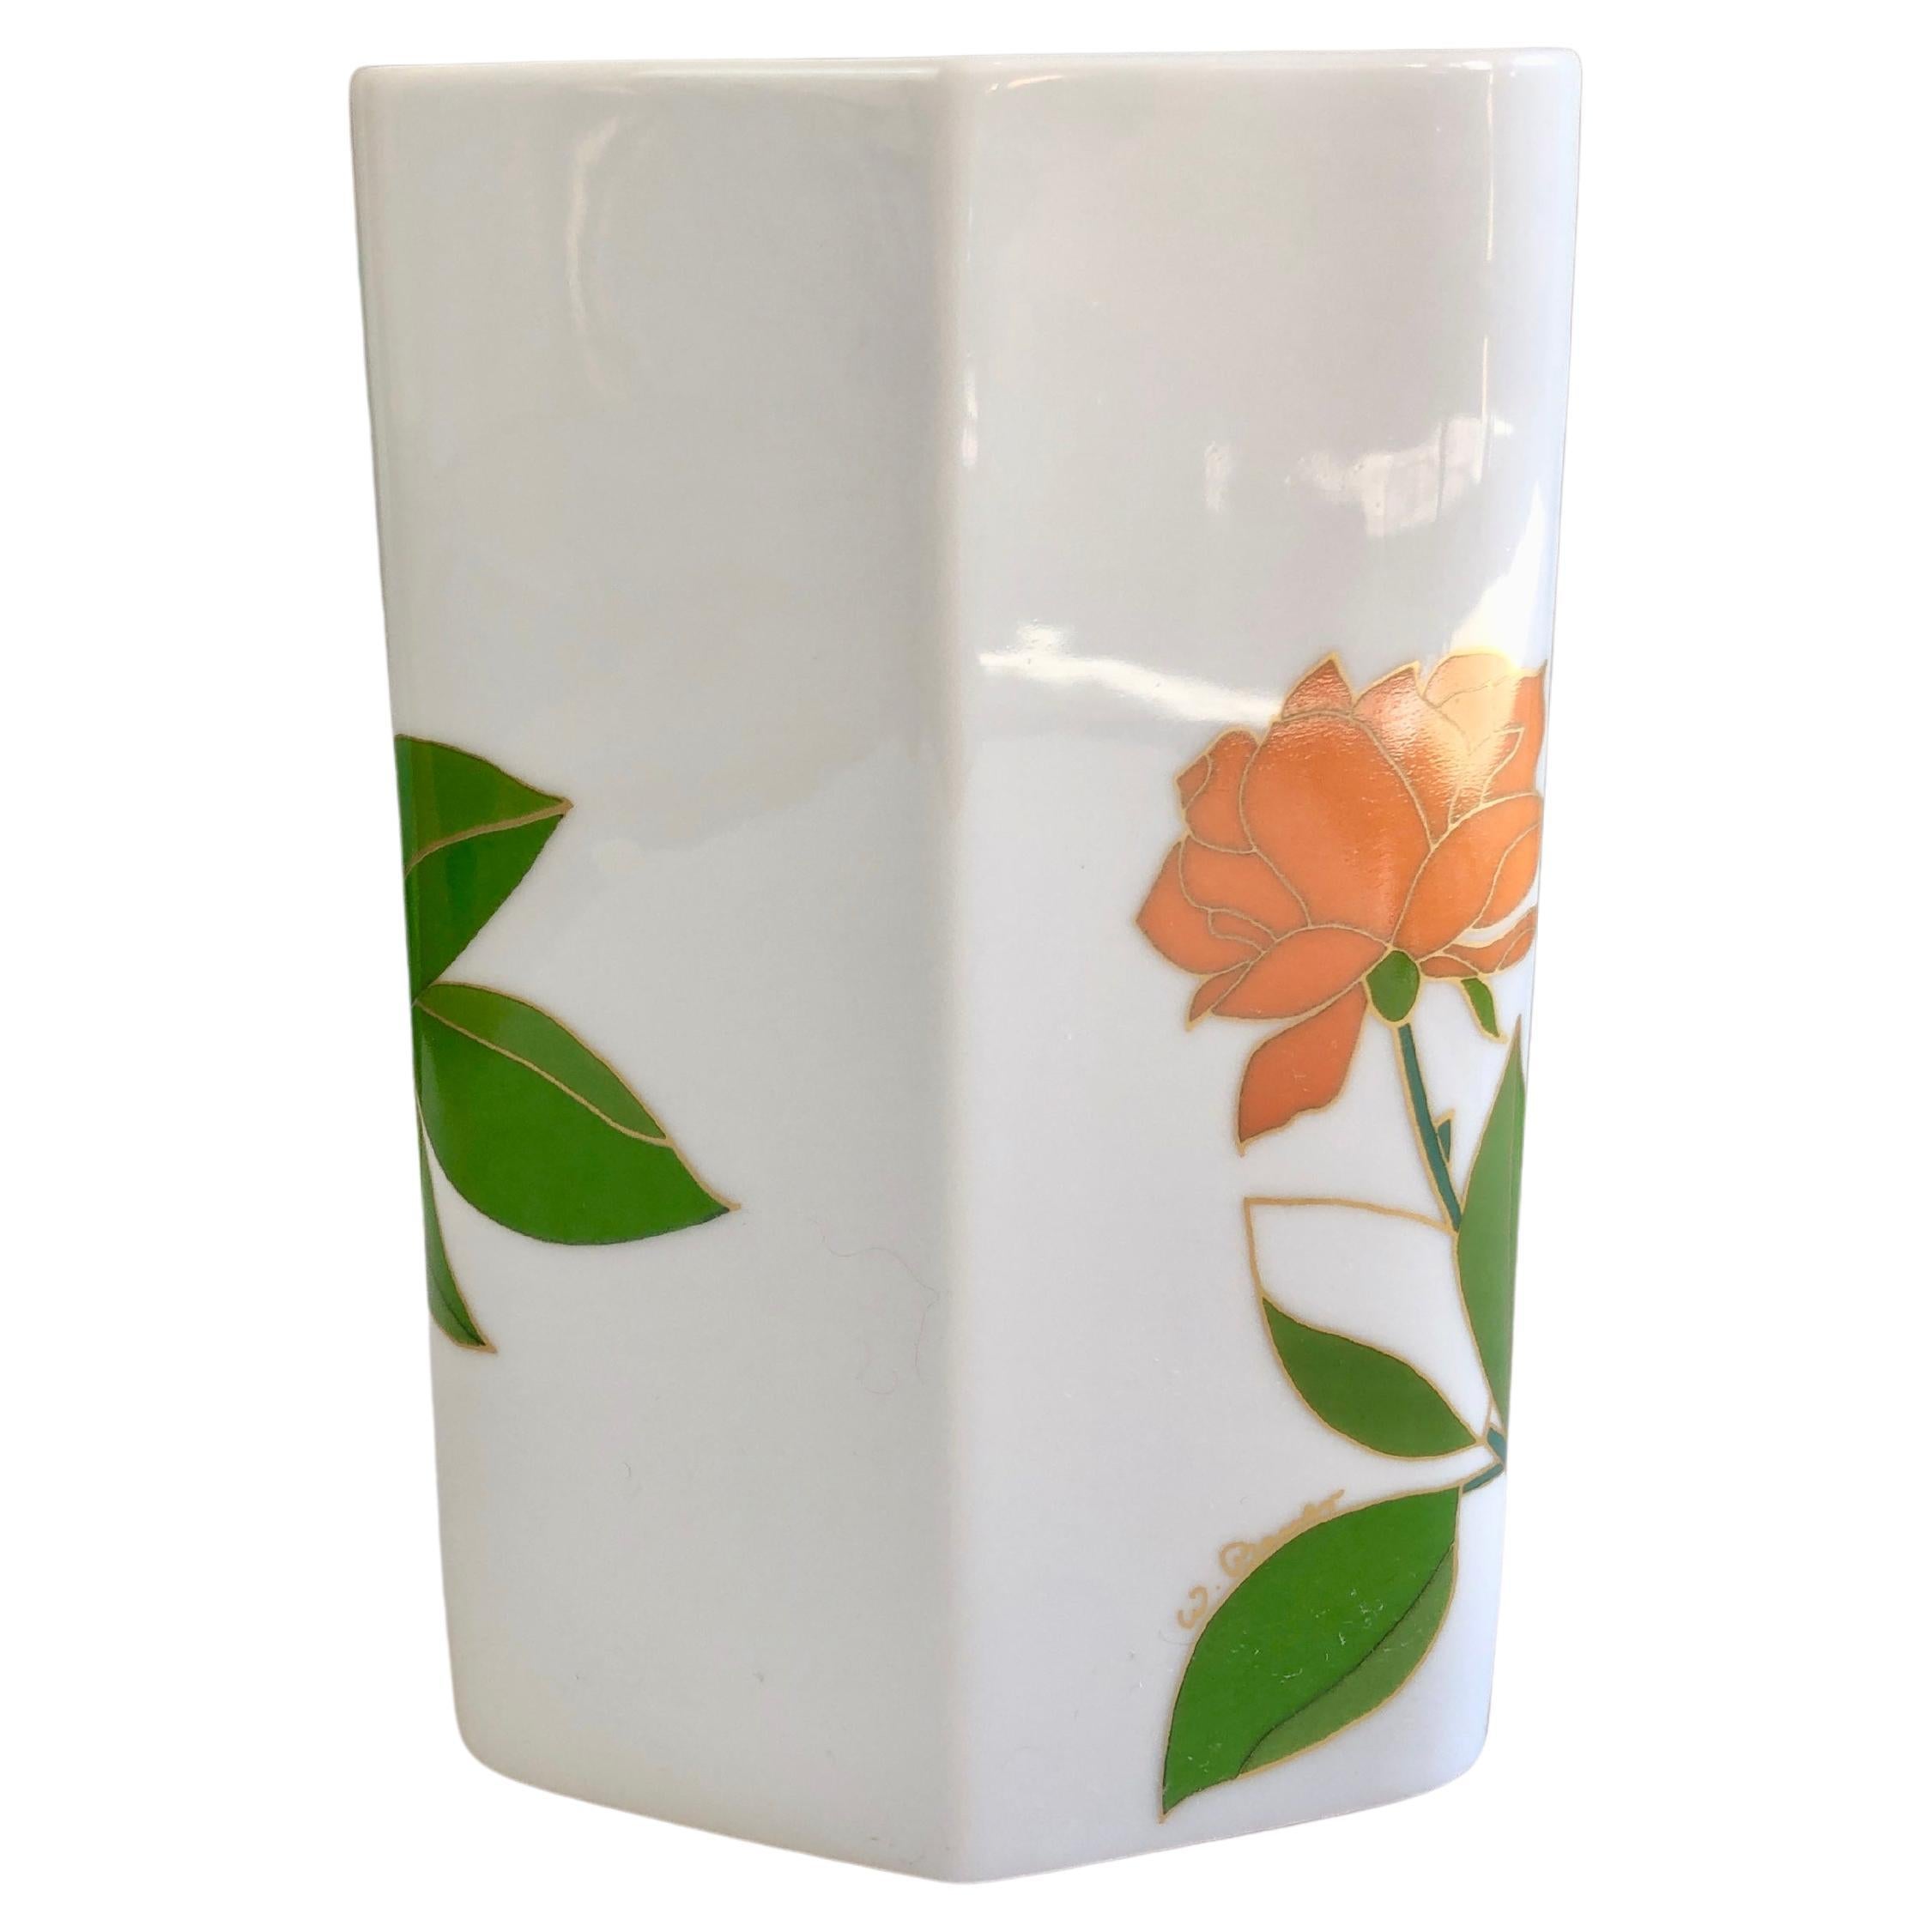 Mid-Century Modern Abstract Floral Vase Rosenthal Studio-Line, by Wolfgang Bauer 1970s, Germany For Sale